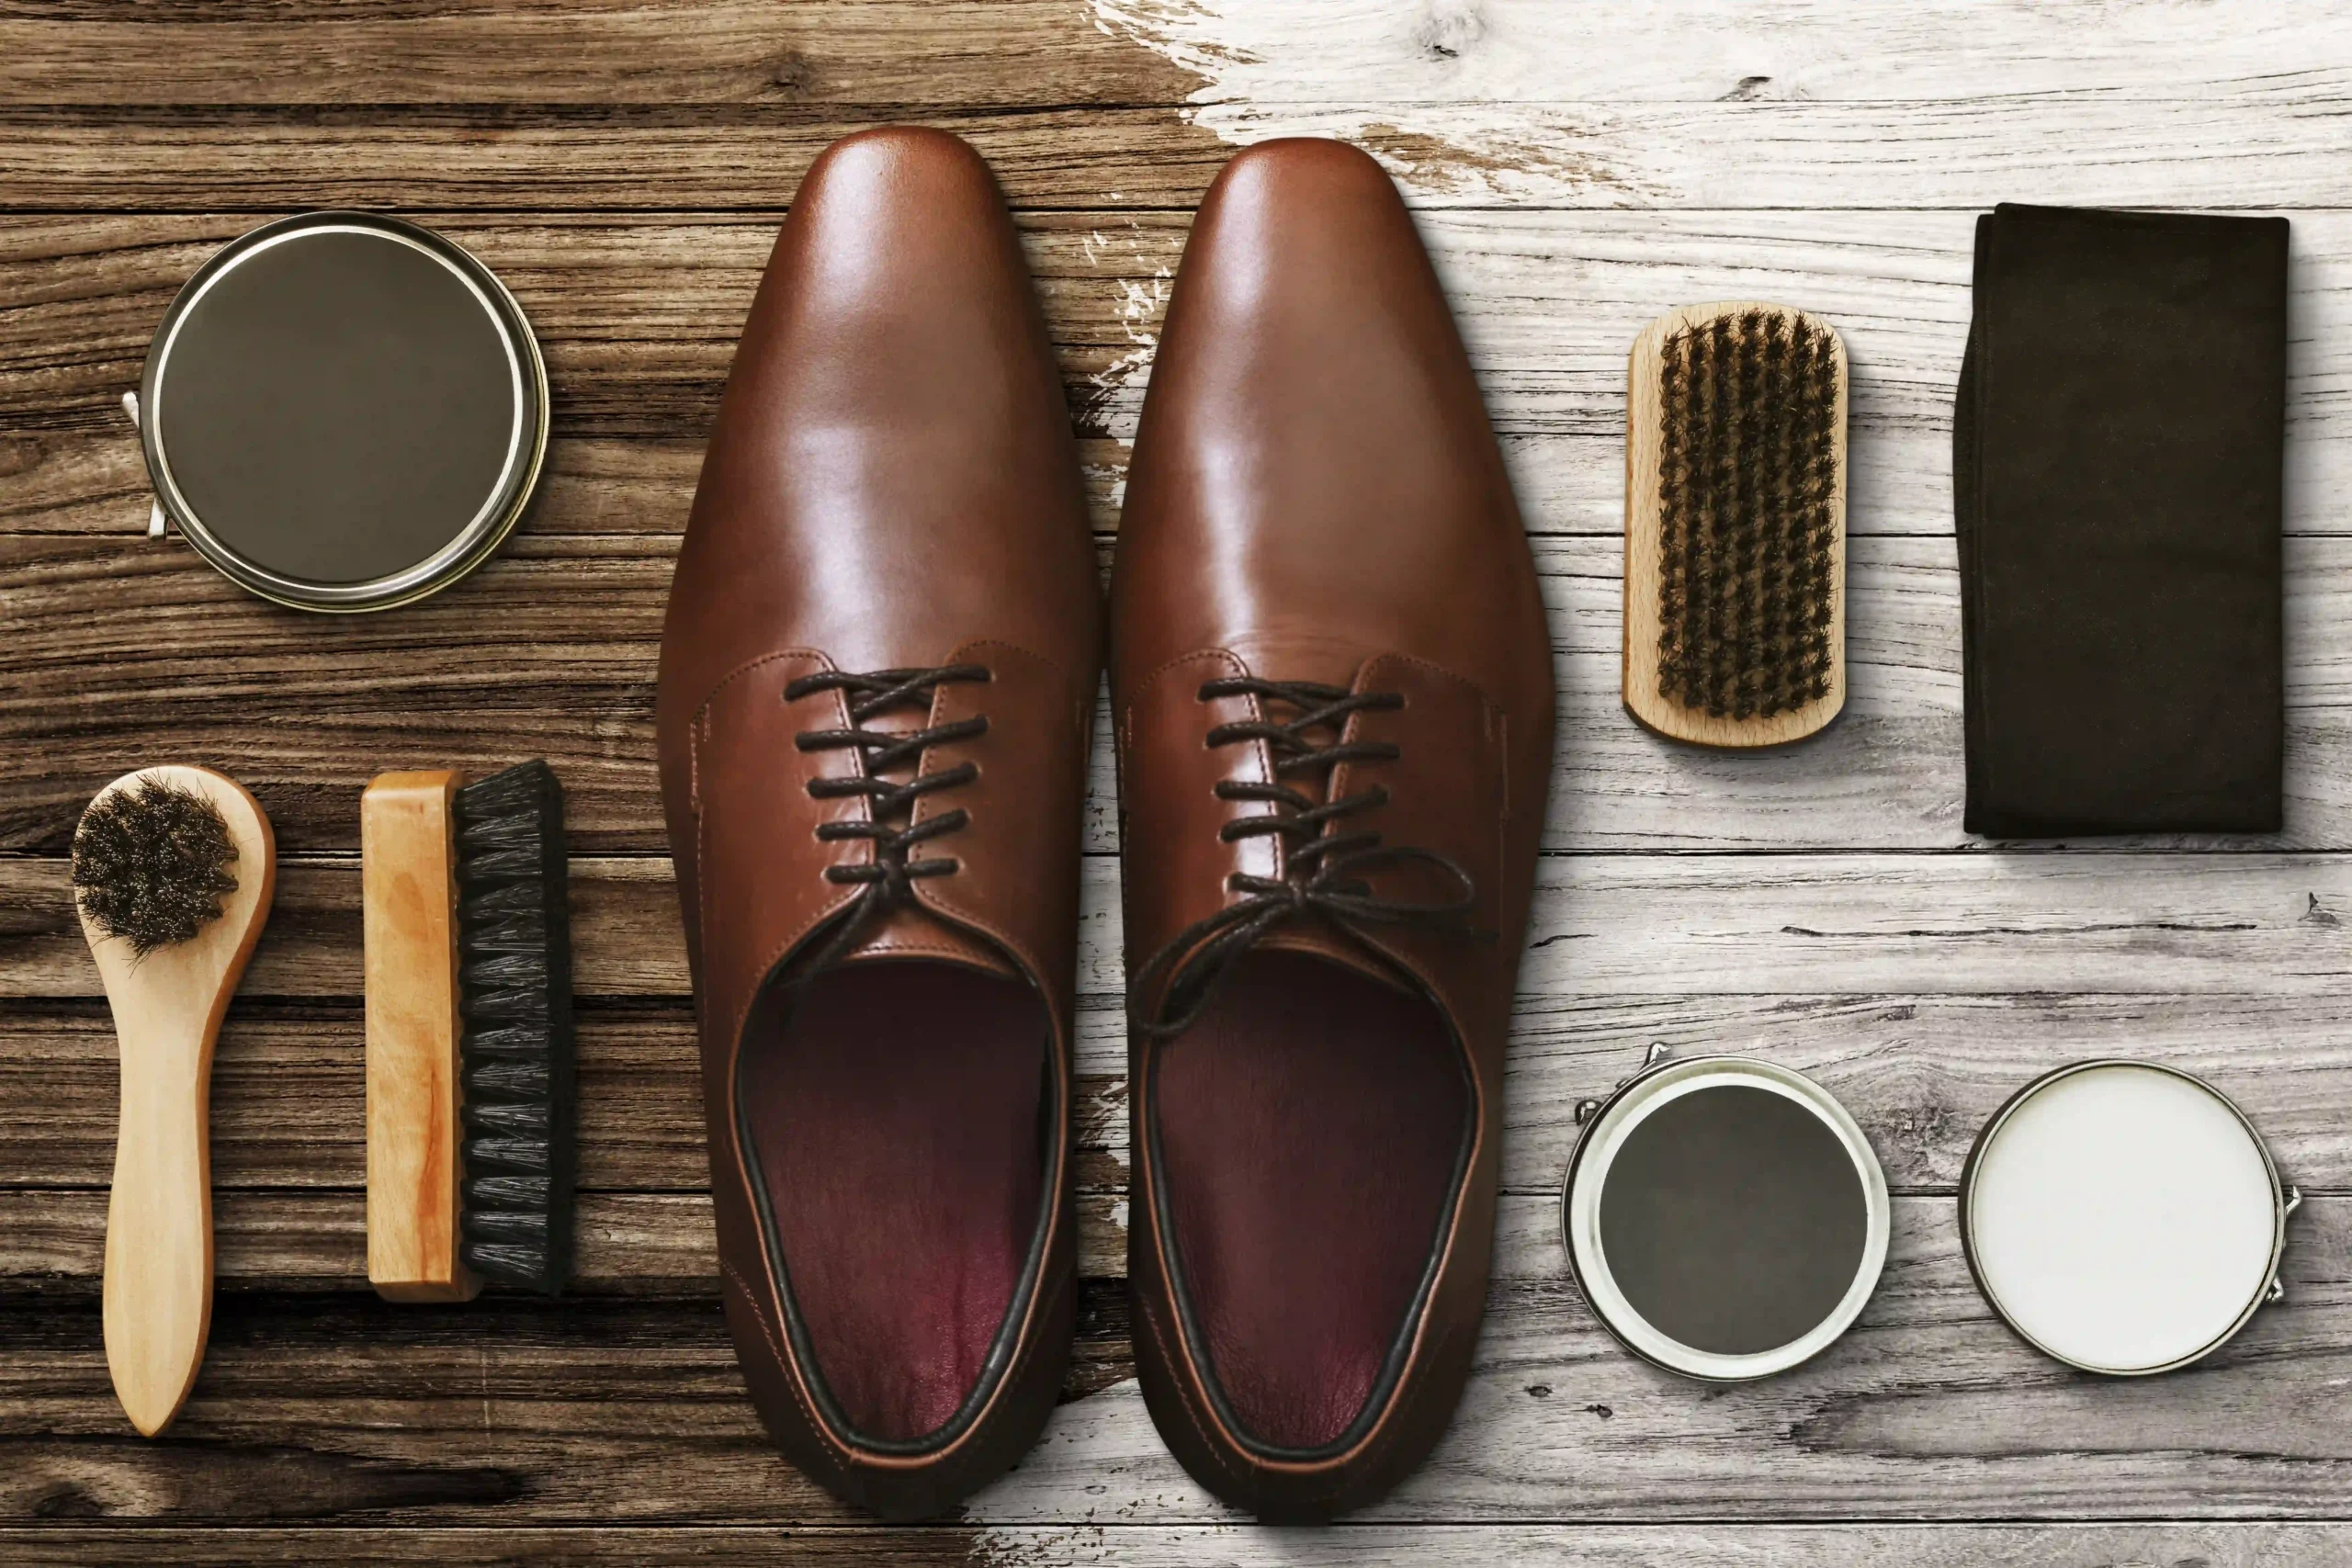 How To Care For Leather Dress Shoes